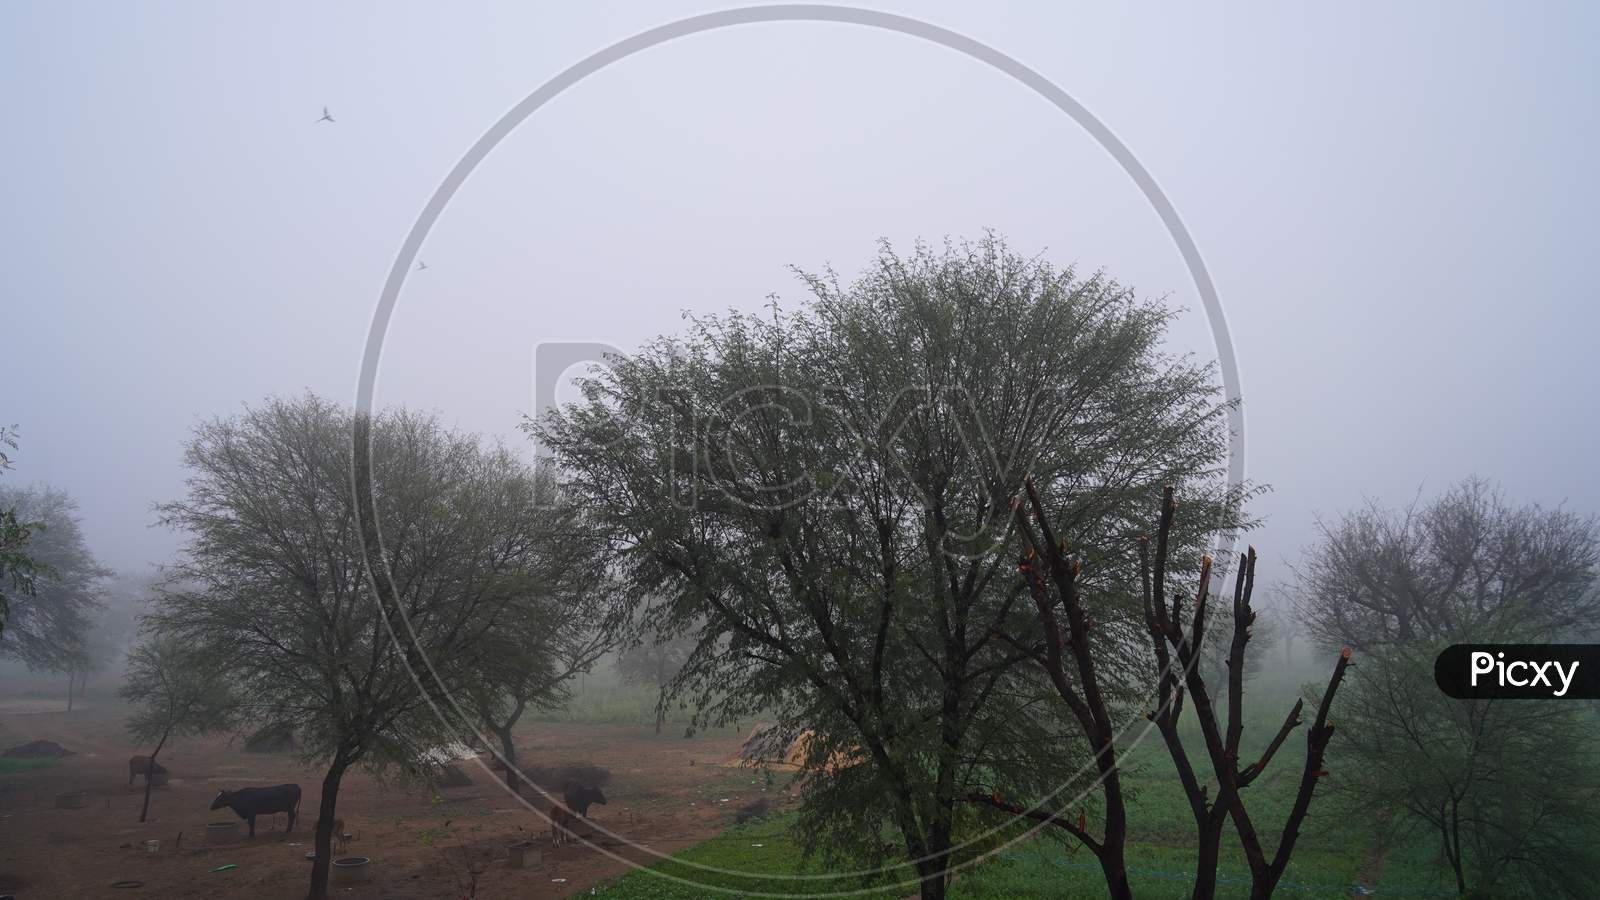 Autumn Fog View In Desert Landscape. Acacia Tree In The Fog Struggling With Extremely Cold Winter In Countryside India.Extremely Cold In North India Concept.